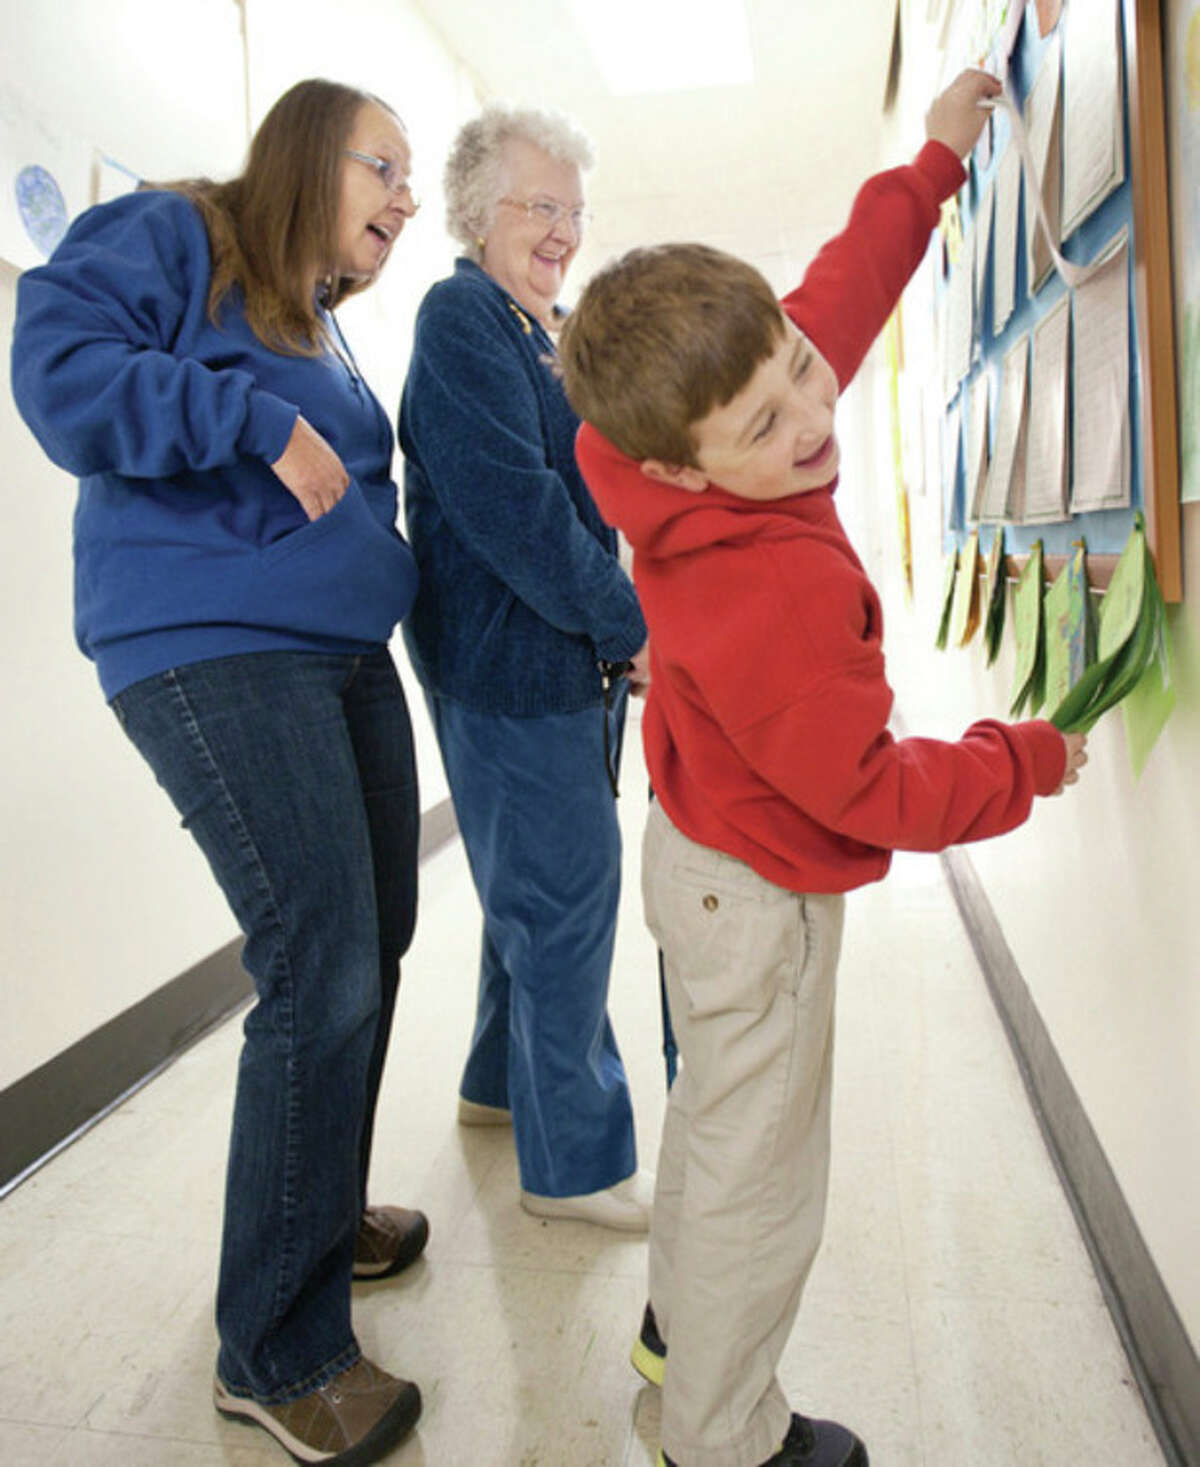 AP photo / Sedalia Democrat, Sydney Brink Second-grader Edson Kehde, of Sedalia, Mo., holds up the first page of a story he wrote about himself Friday so that his grandmother, Carolyn Starke, left, and great-grandmother Sue Cromley can read the second page in a hallway at Sacred Heart School during the school's annual Grandparents Day.